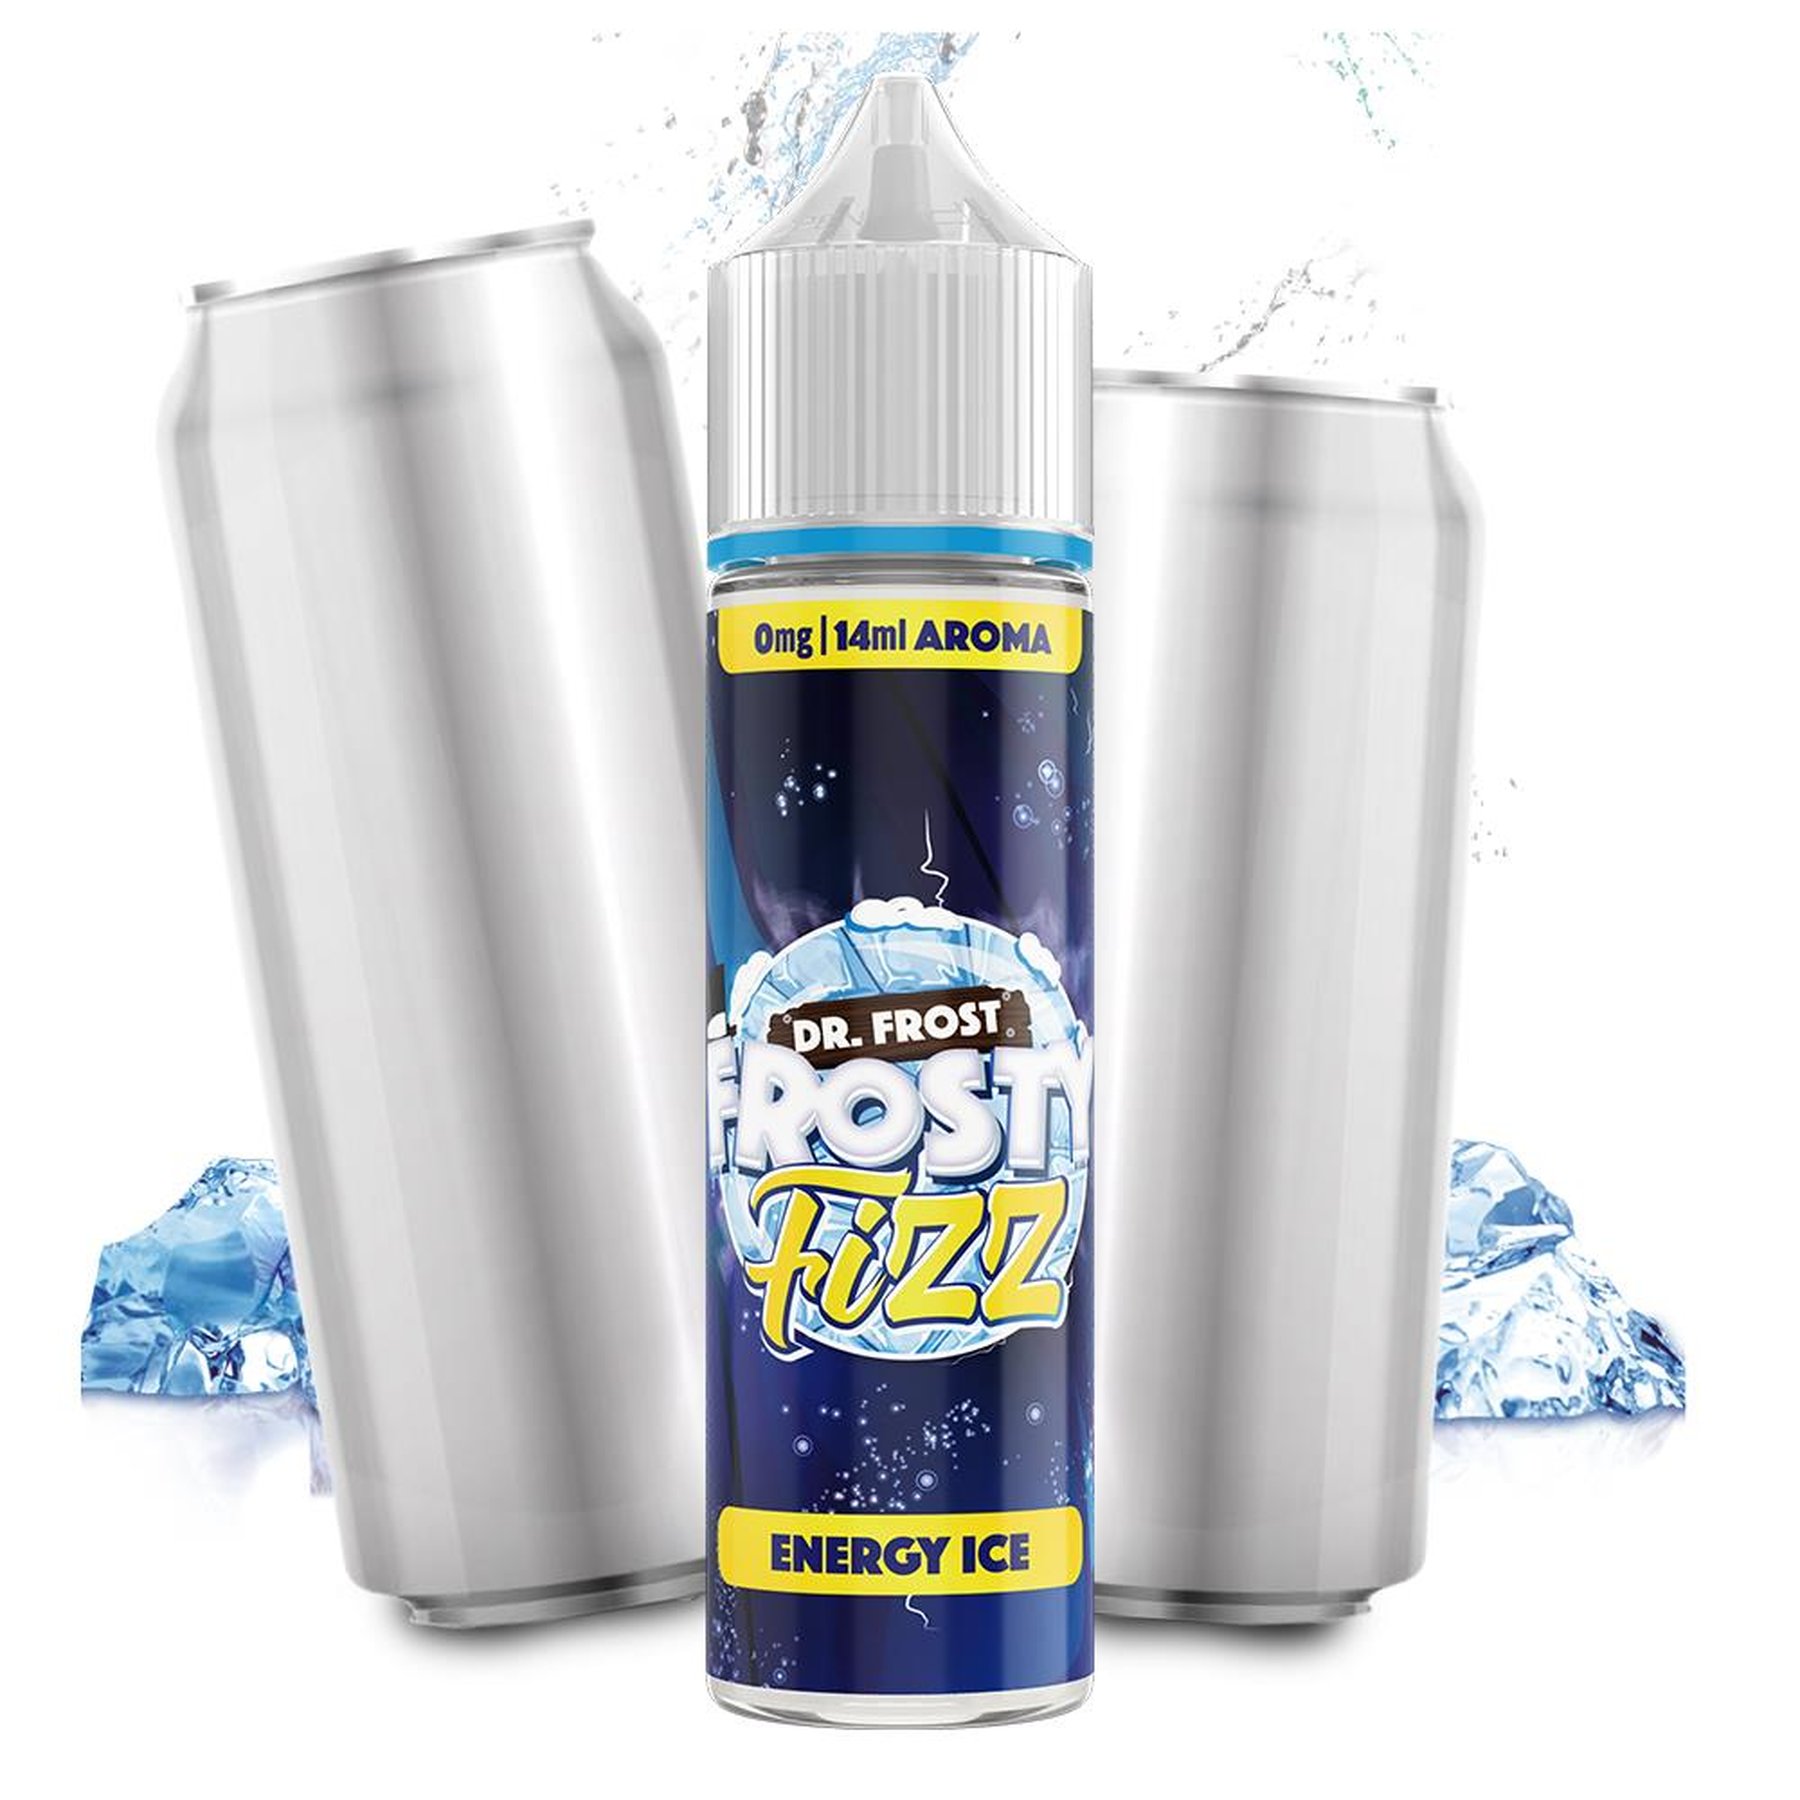 Dr. Frost Energy Ice Longfill 14ml